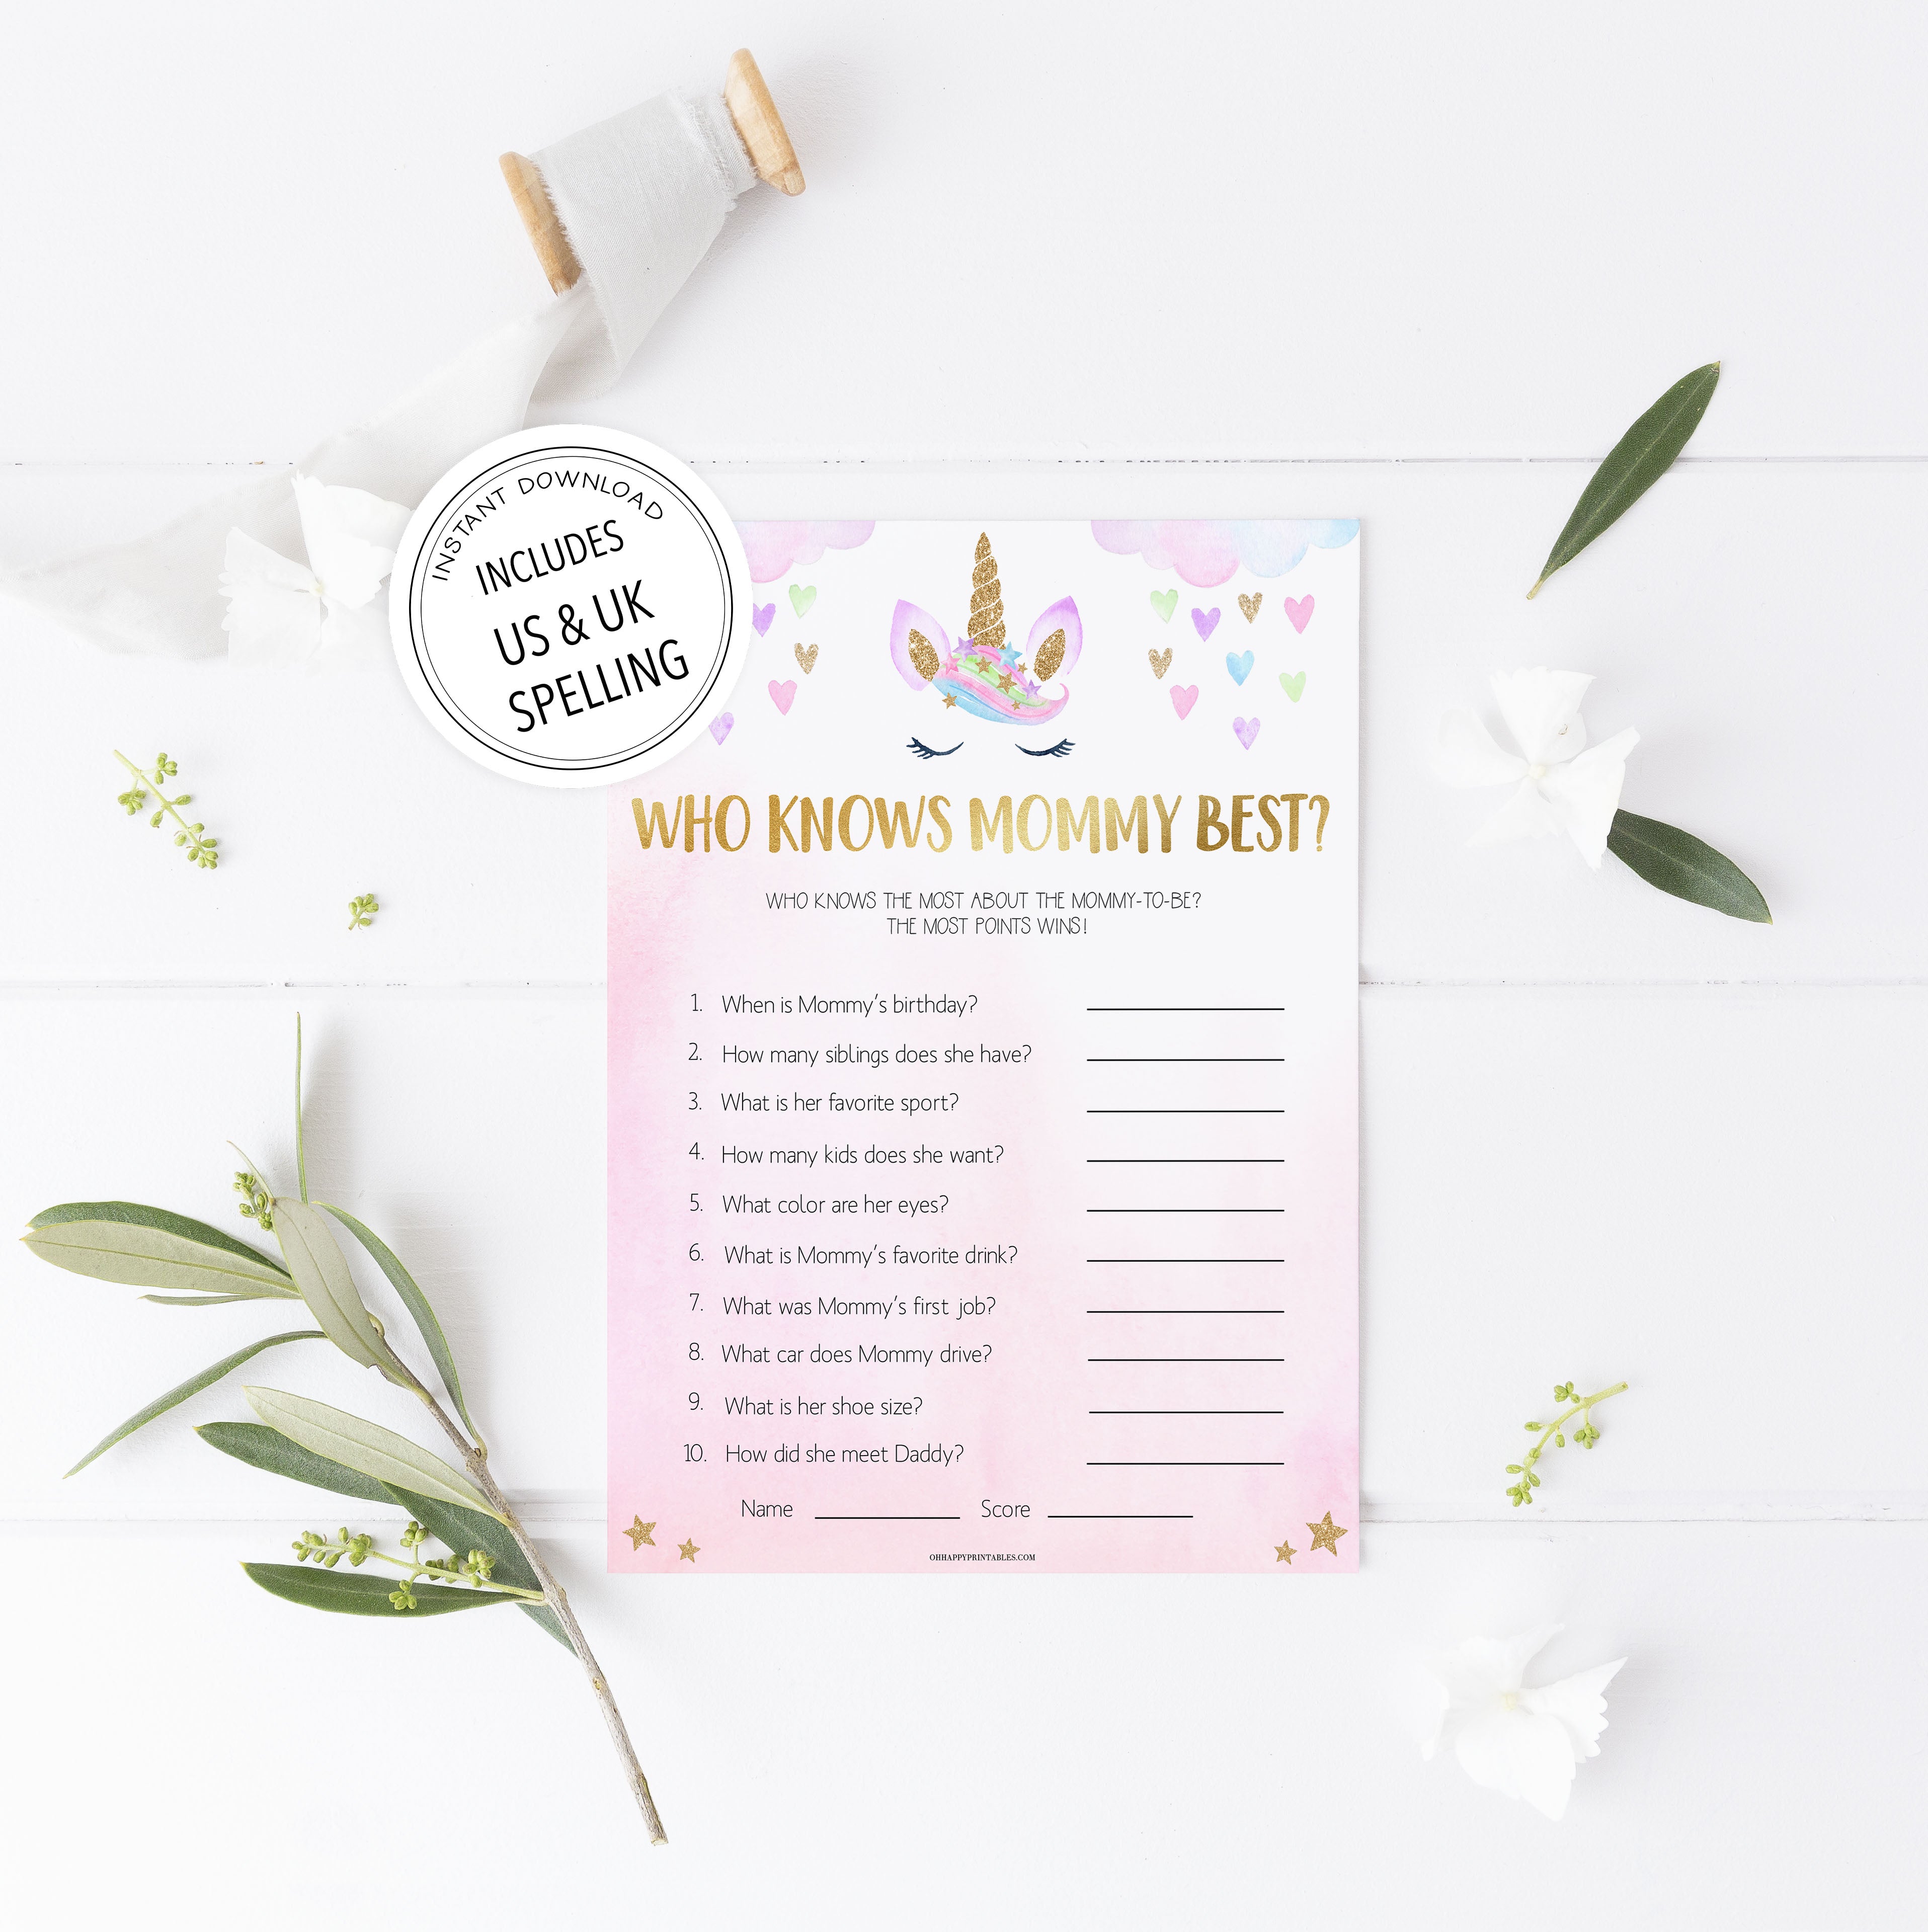 who knows mommy best baby game, Printable baby shower games, unicorn baby games, baby shower games, fun baby shower ideas, top baby shower ideas, unicorn baby shower, baby shower games, fun unicorn baby shower ideas